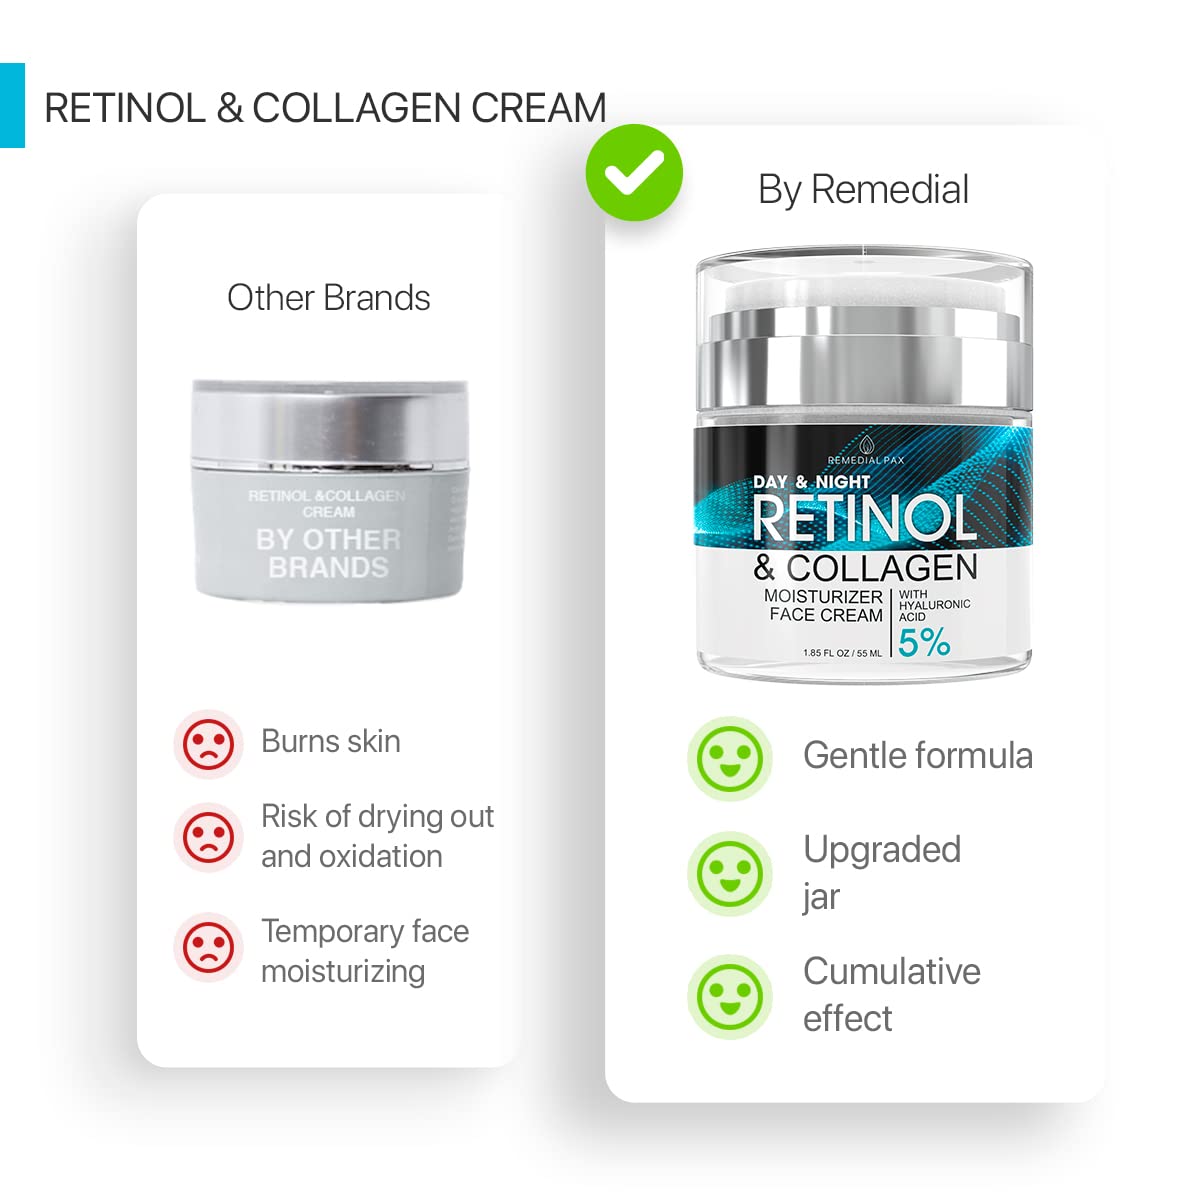 Wholesale prices with free shipping all over United States Face Moisturizer Retinol Cream - Day & Night Moisturizing Cream - Neck & Neckline Cream with Collagen & Hyaluronic Acid - Skin Care Facial Moisturizer for Women & Men - Steven Deals